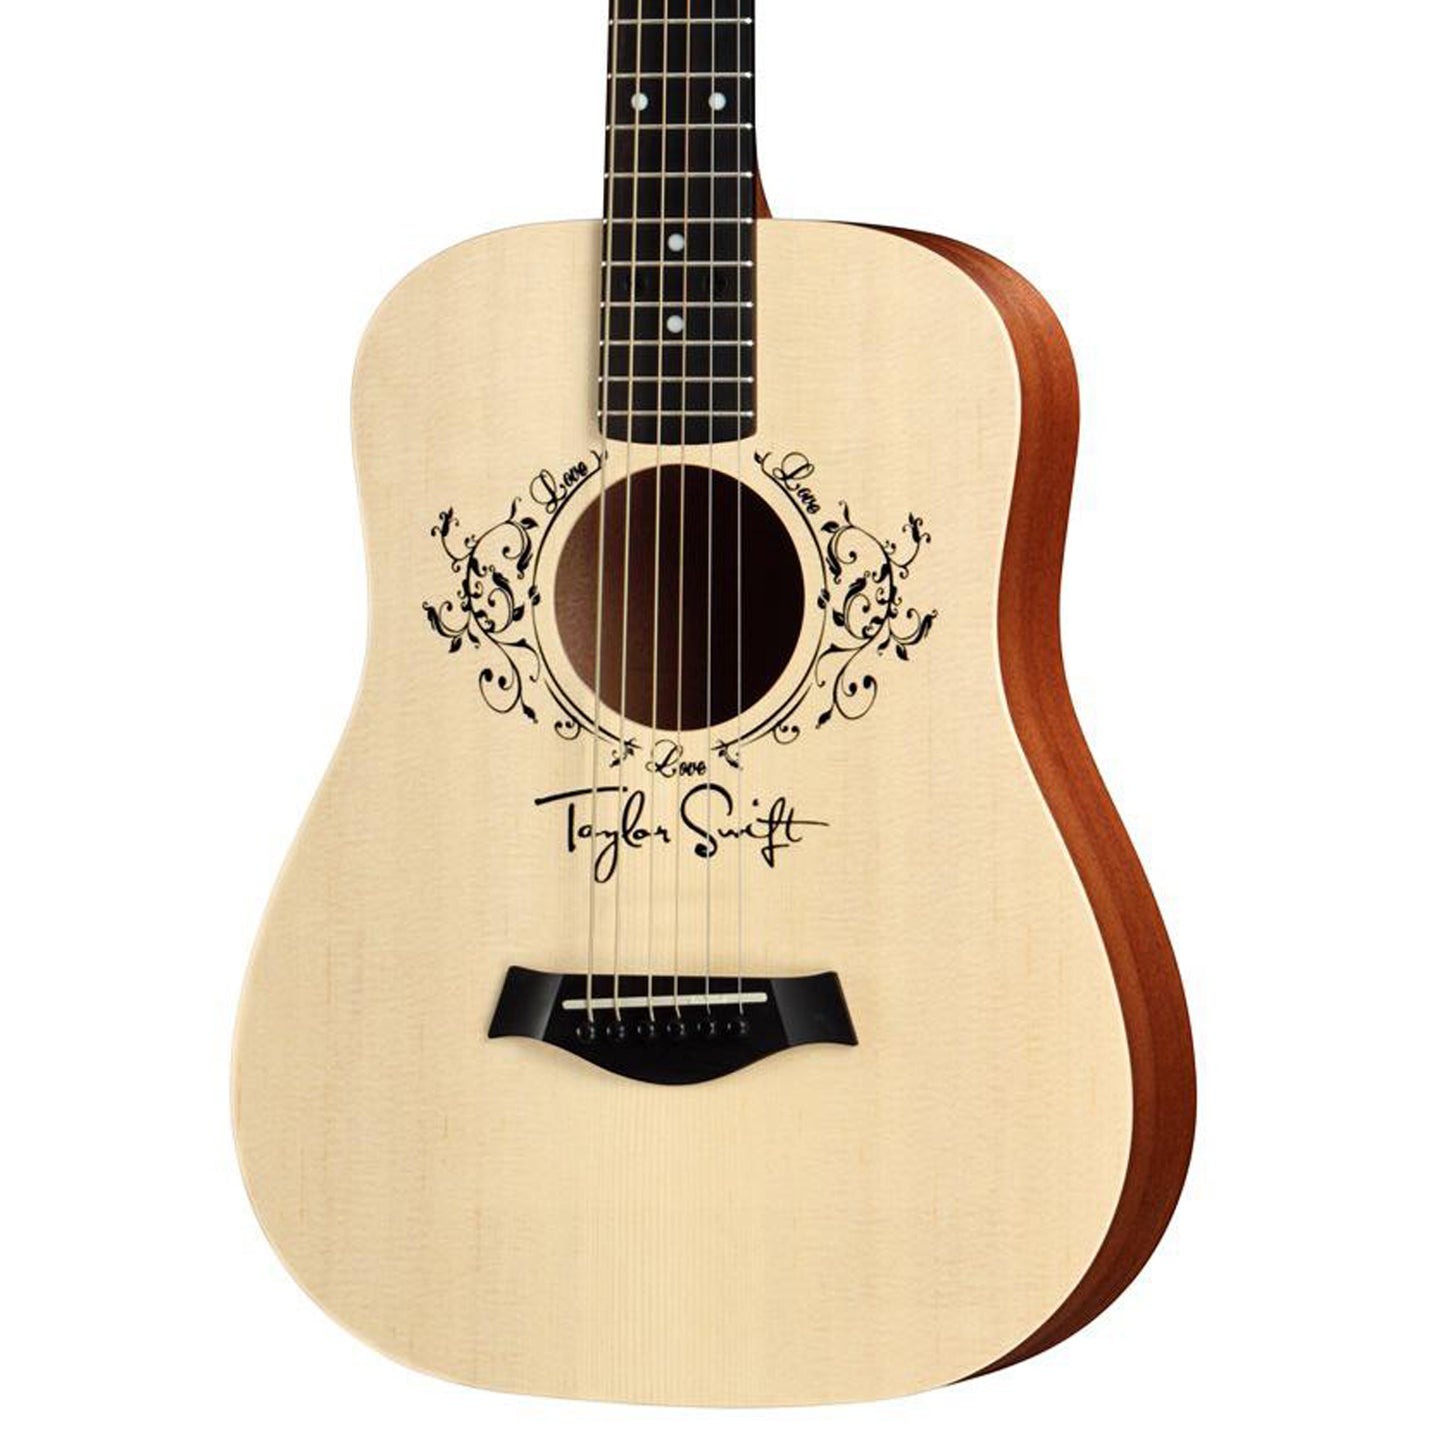 Taylor Baby Taylor Swift Signature Edition Acoustic Guitar